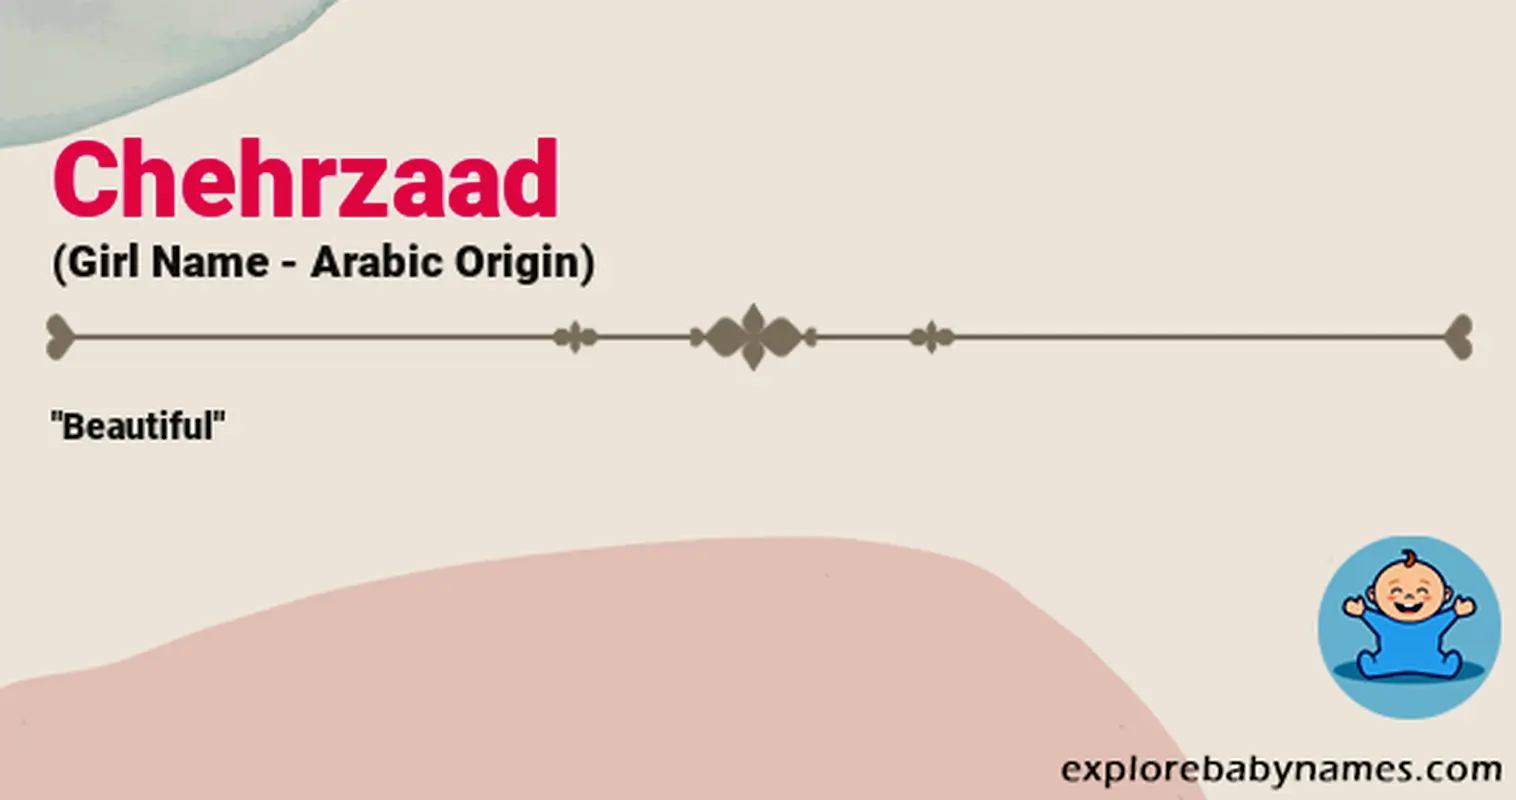 Meaning of Chehrzaad